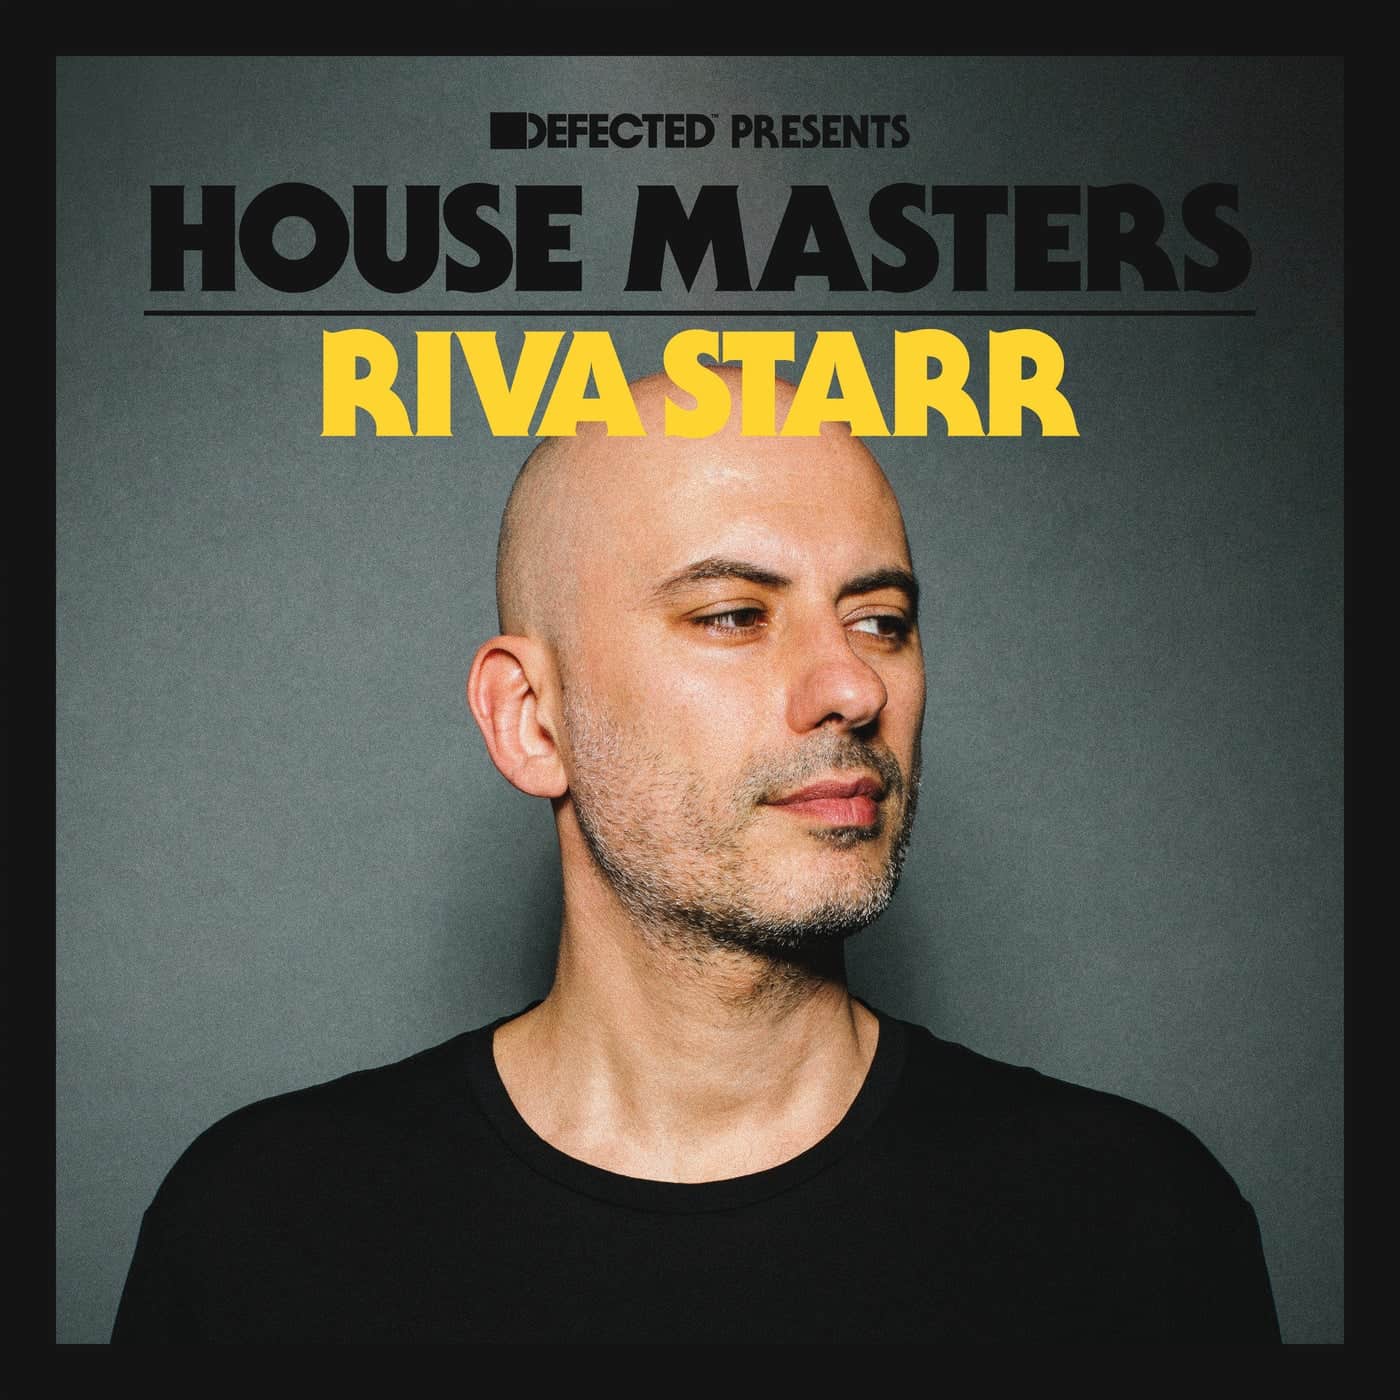 Download VA - Defected presents House Masters - Riva Starr on Electrobuzz